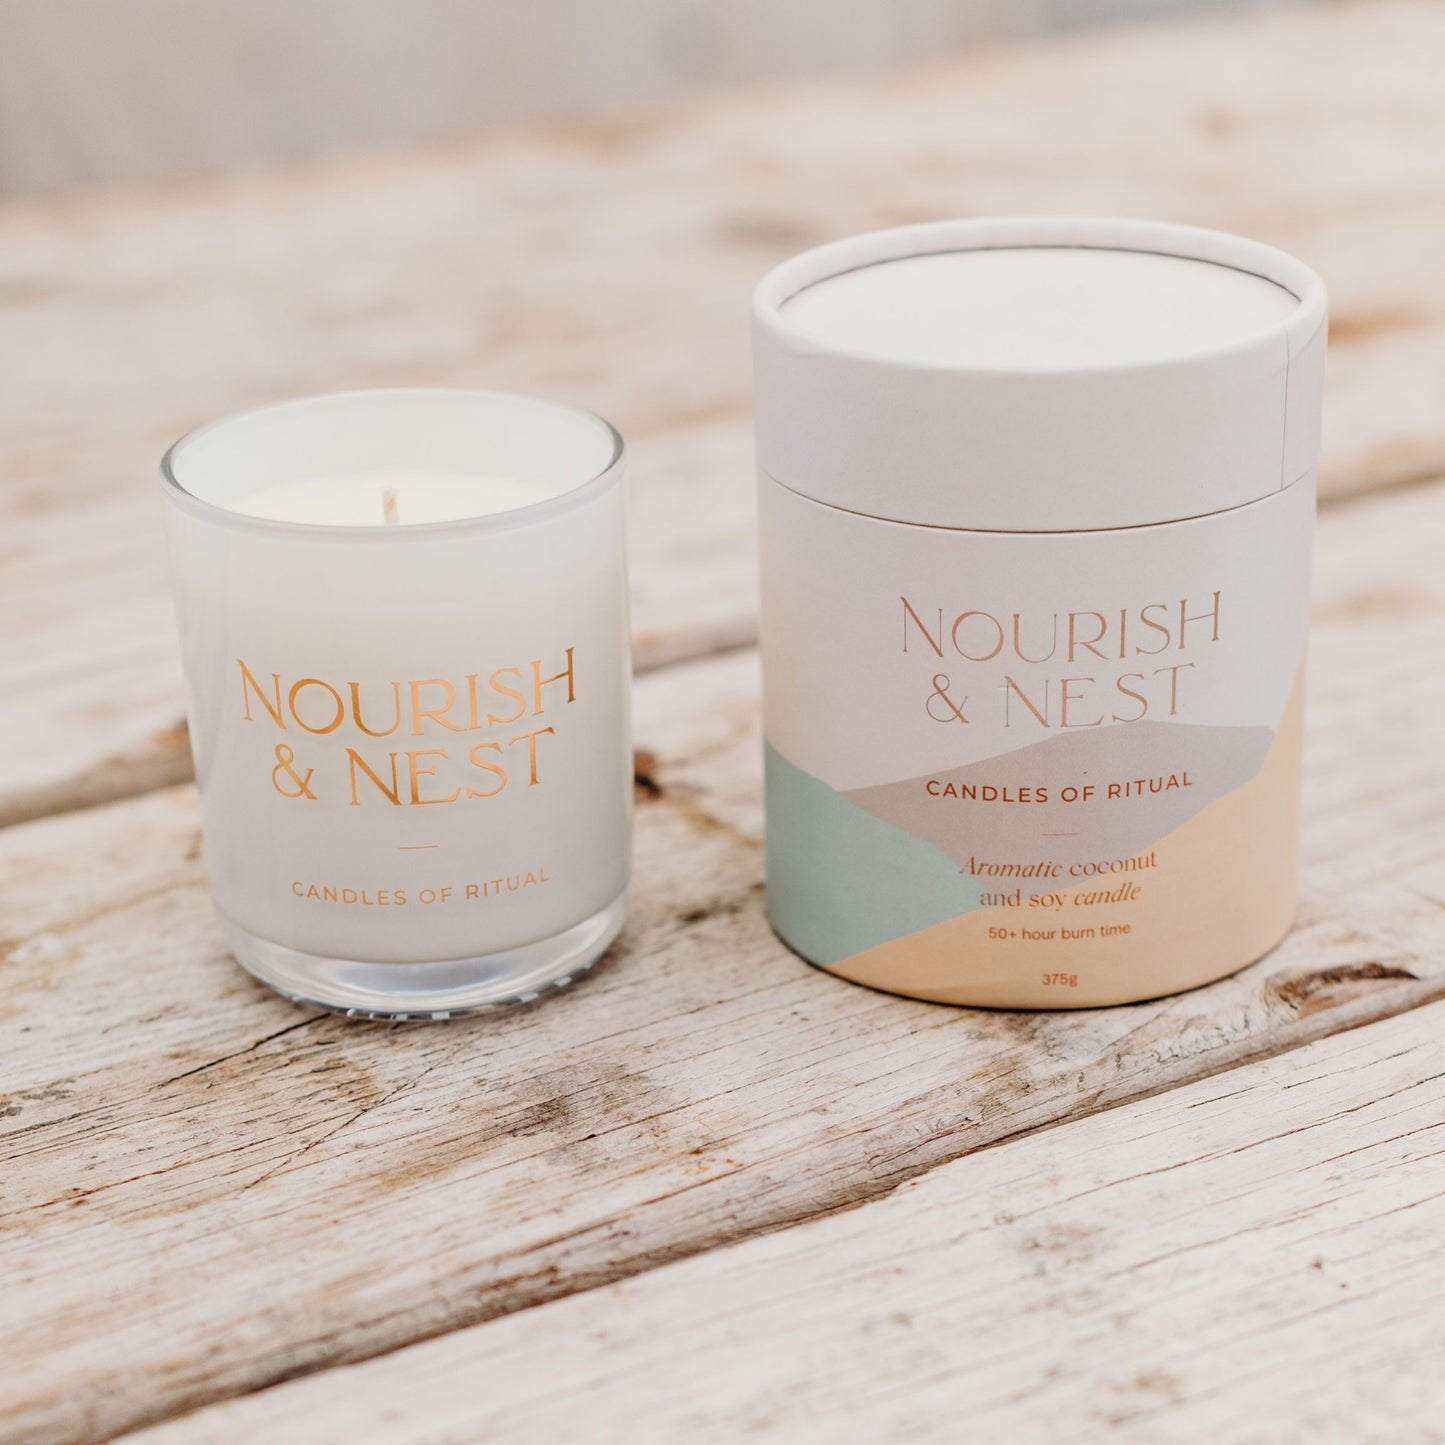 'Wild Honey & Amber' - coconut & soy candle